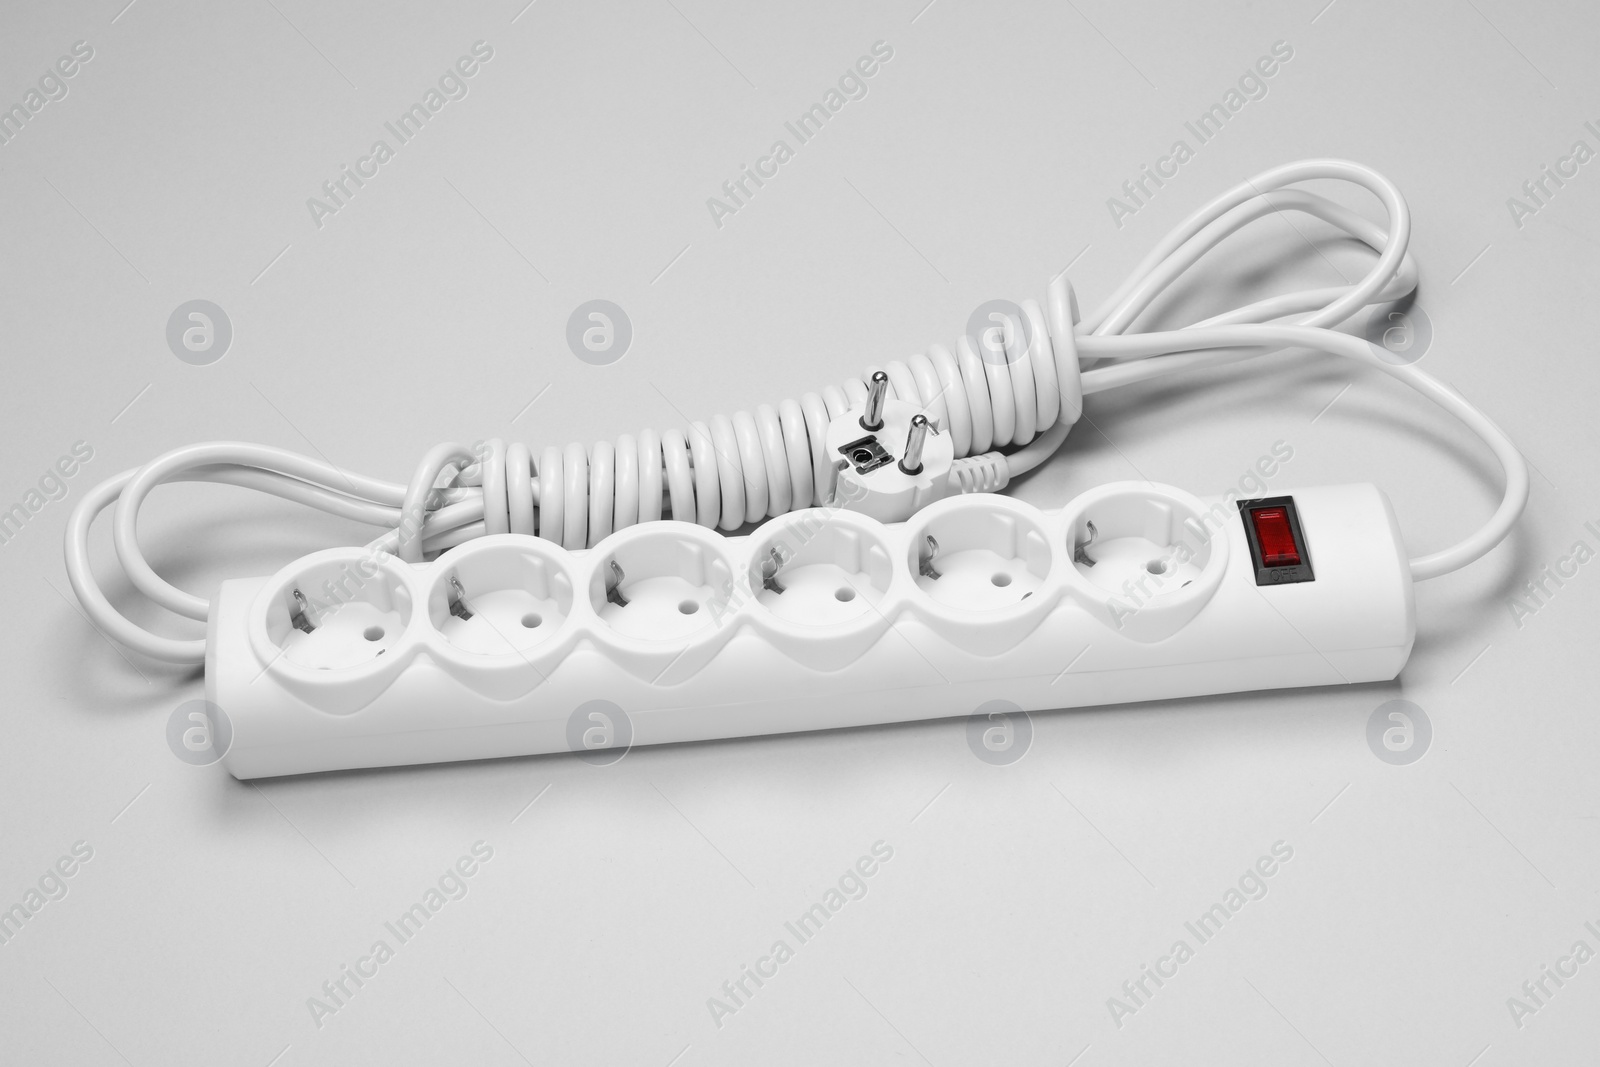 Photo of New power strip on white background. Electrician's equipment